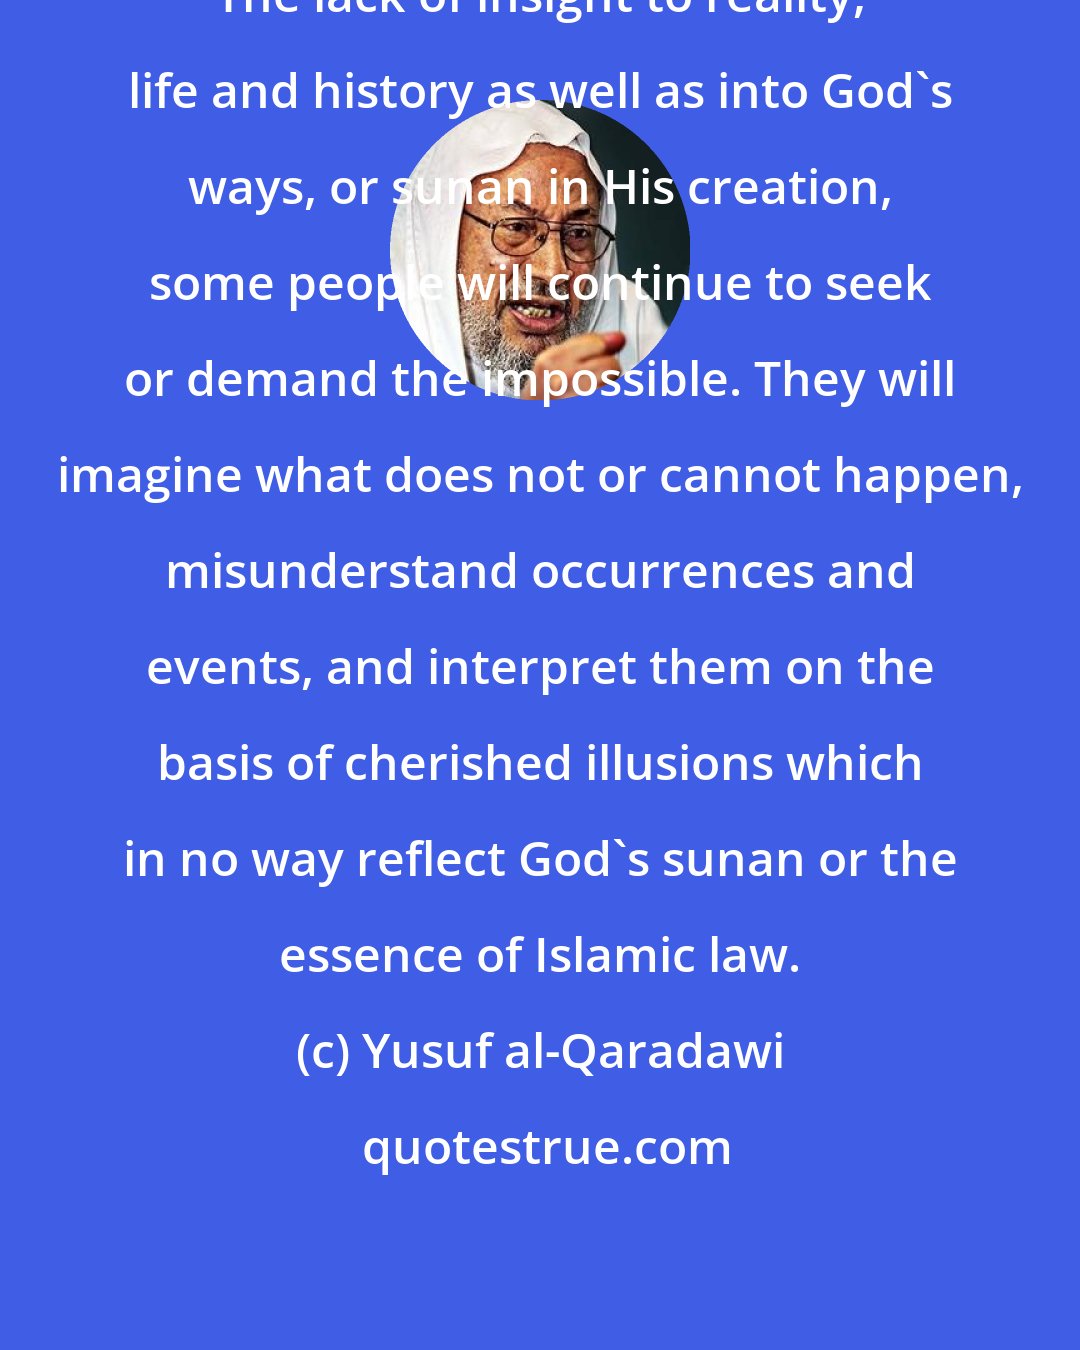 Yusuf al-Qaradawi: The lack of insight to reality, life and history as well as into God's ways, or sunan in His creation, some people will continue to seek or demand the impossible. They will imagine what does not or cannot happen, misunderstand occurrences and events, and interpret them on the basis of cherished illusions which in no way reflect God's sunan or the essence of Islamic law.